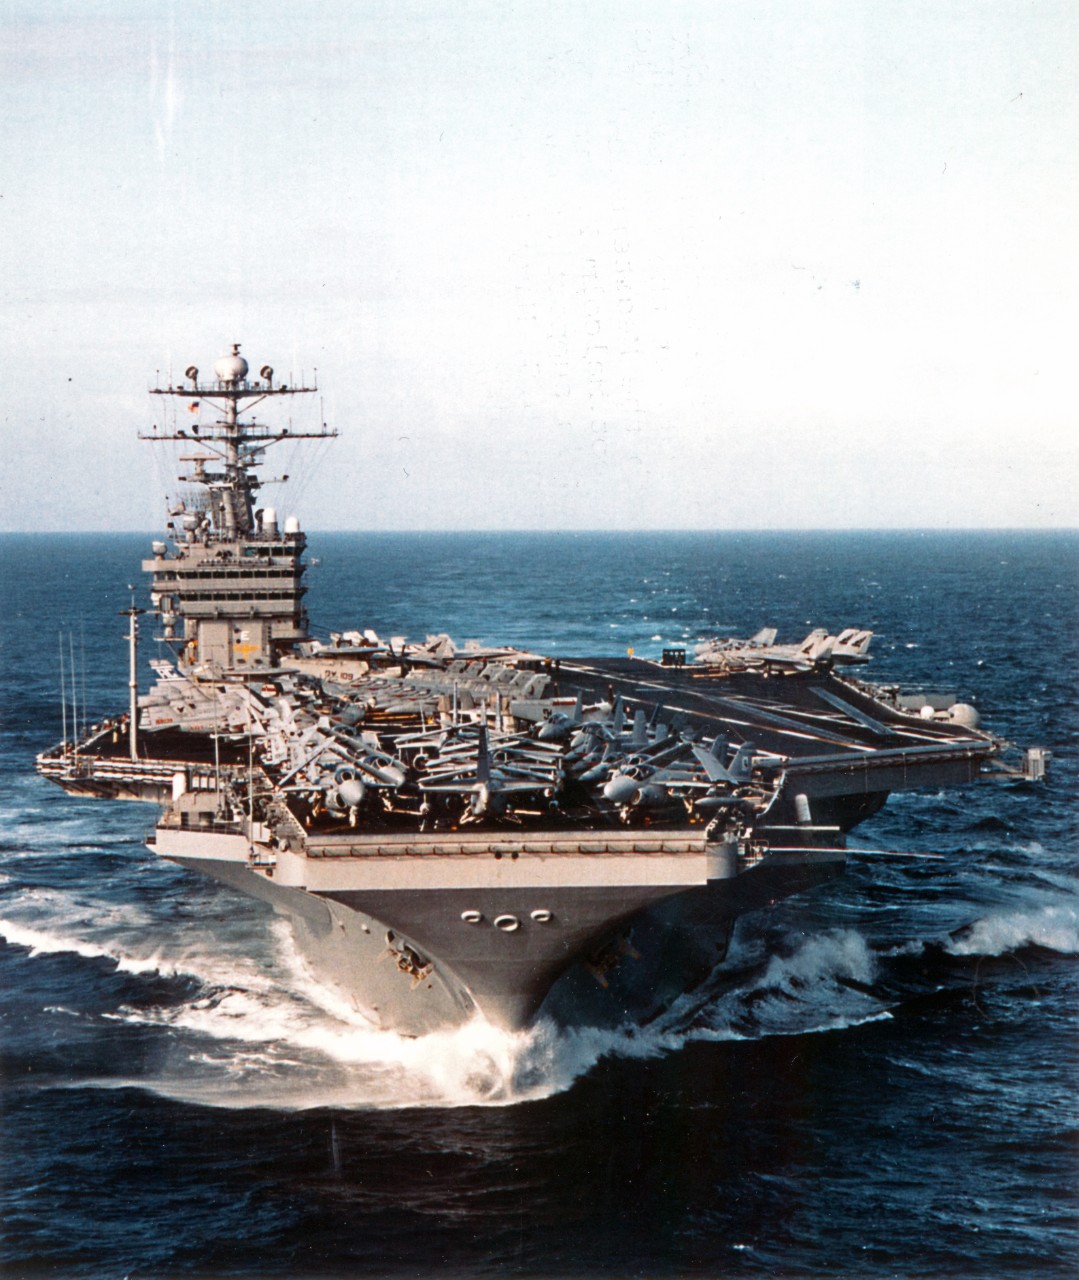 The U.S. Navy’s nuclear powered aircraft carrier USS George Washington (CVN-73) slices through the waters of the eastern Atlantic Ocean, February 3, 1996. Commanded by Captain Malcolm P. Branch, USS George Washington left her homeport of Norfolk, Virginia, on January 26th for a scheduled six month deployment to the Mediterranean. Once on station with Commander Sixth Fleet, she will patrol the waters of the Adriatic in support of NATO Peace Keeping Operation Joint Endeavor.